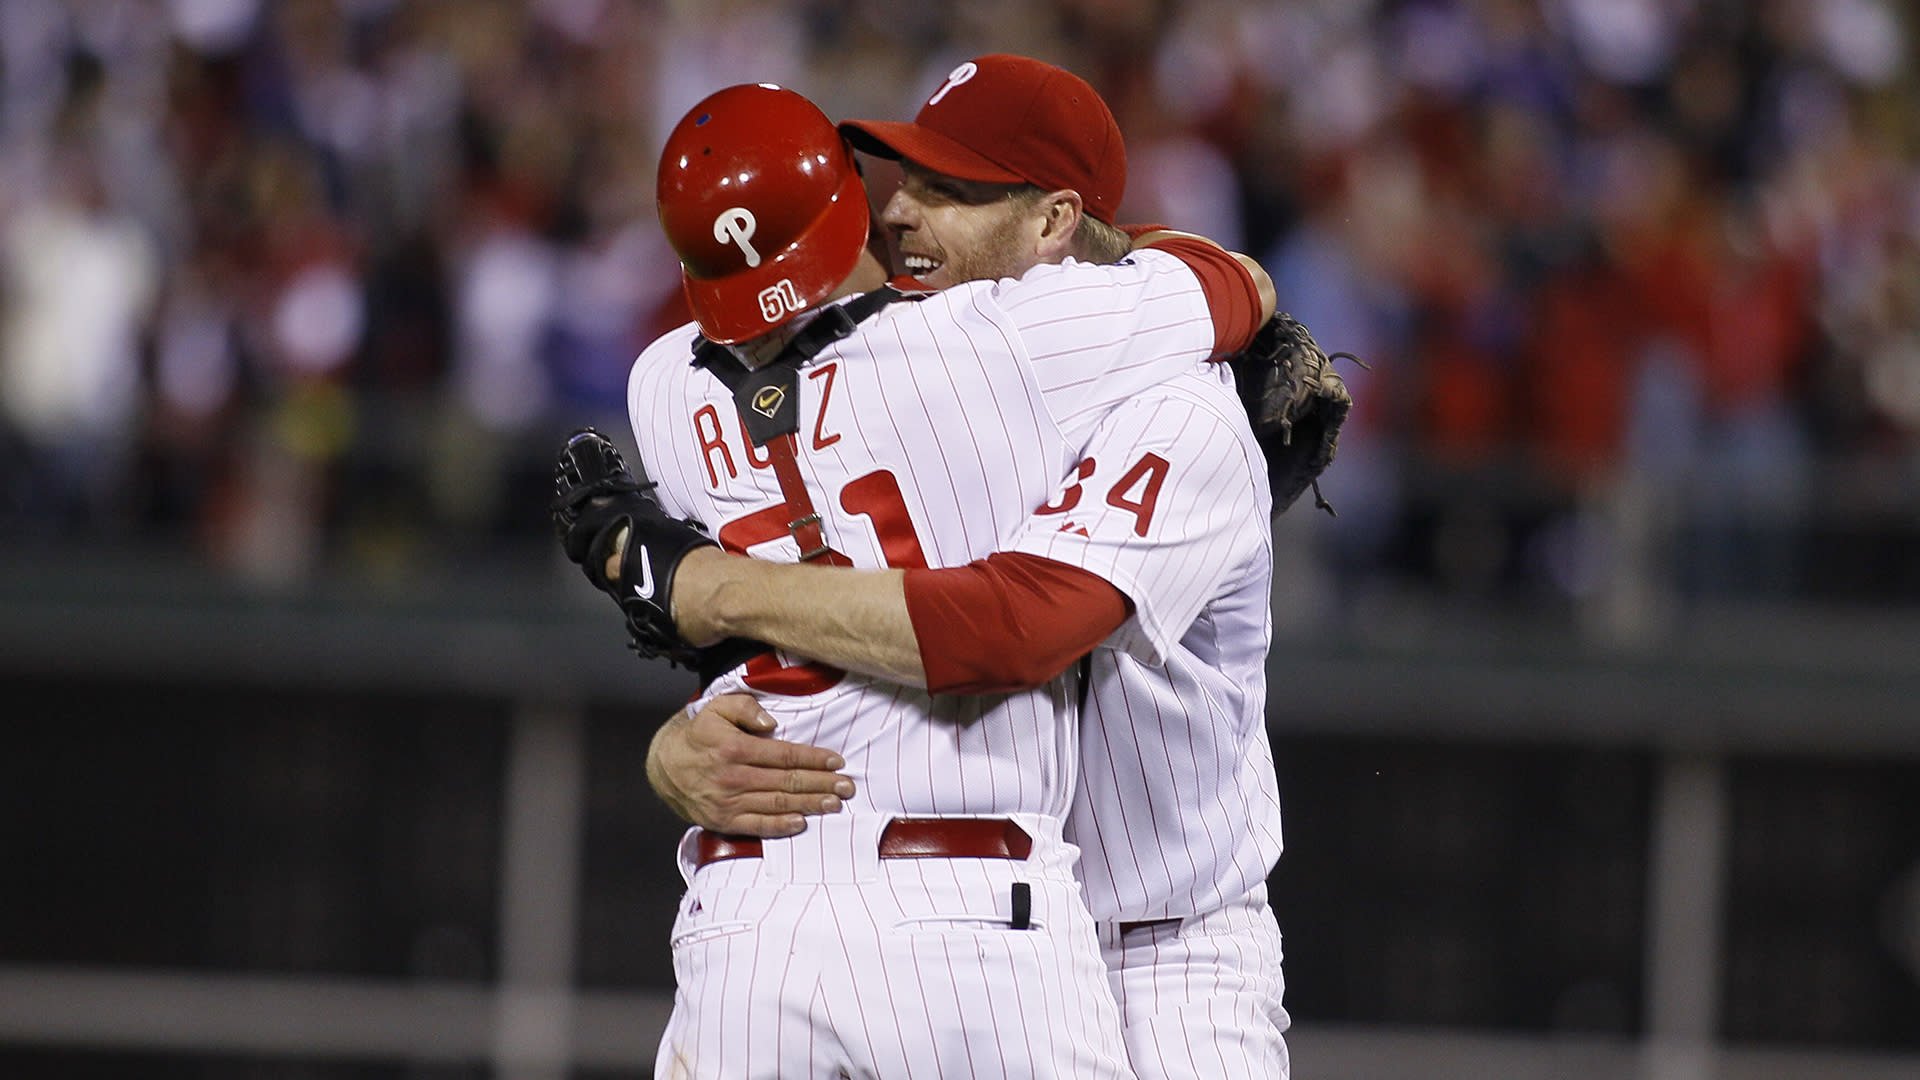 Remembering Roy Halladay's perfect game and playoff-no hitter